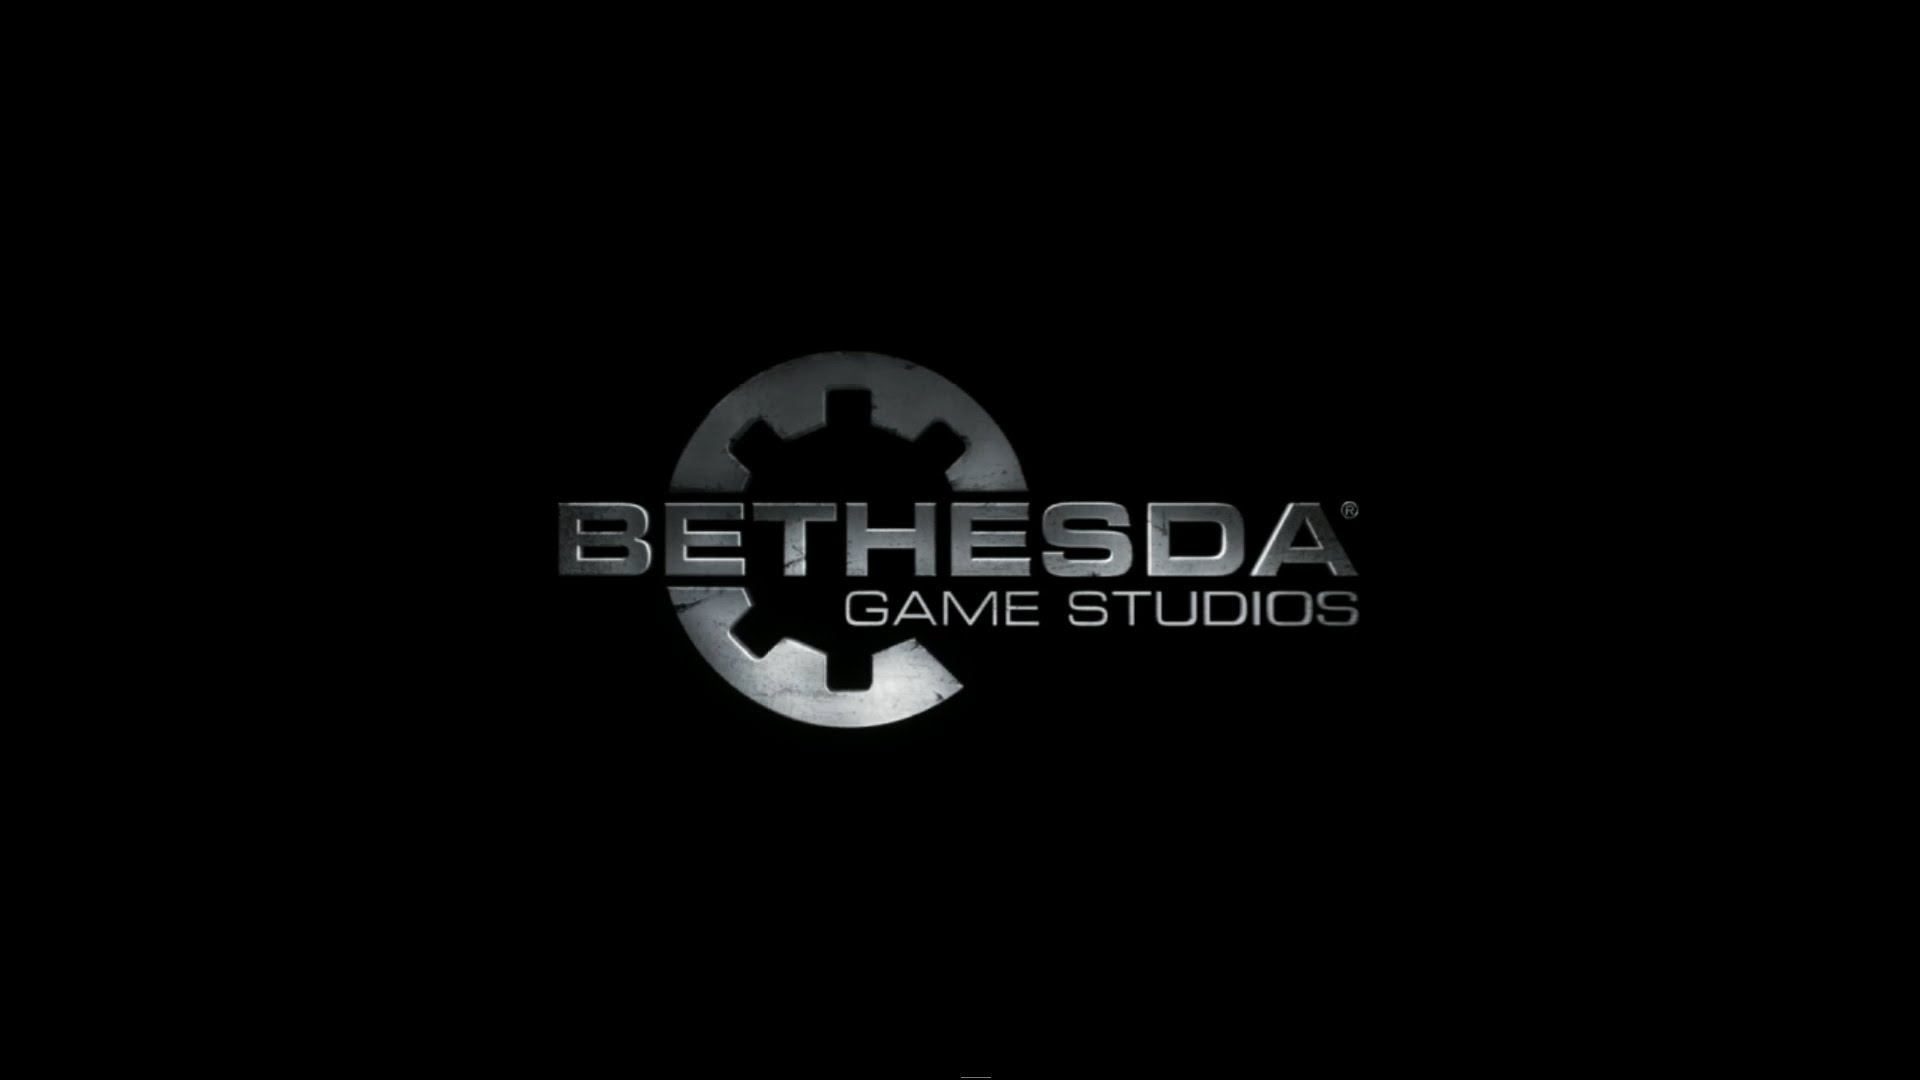 HQ Bethesda Wallpapers | File 40.77Kb